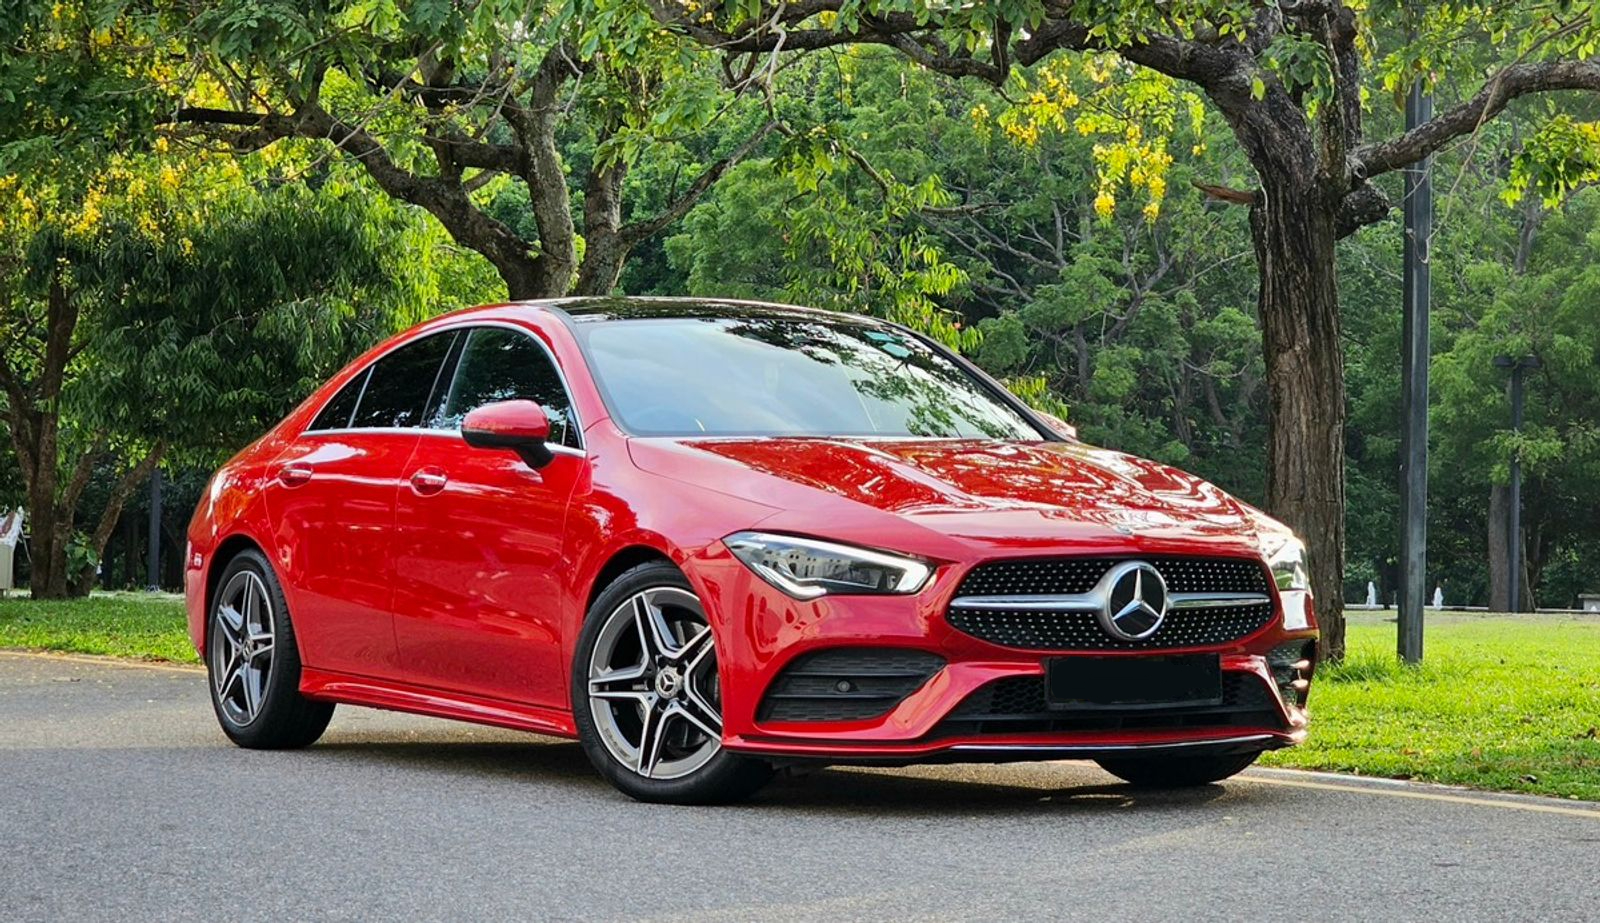 Ford Mustang vs Mercedes Benz CLA 200